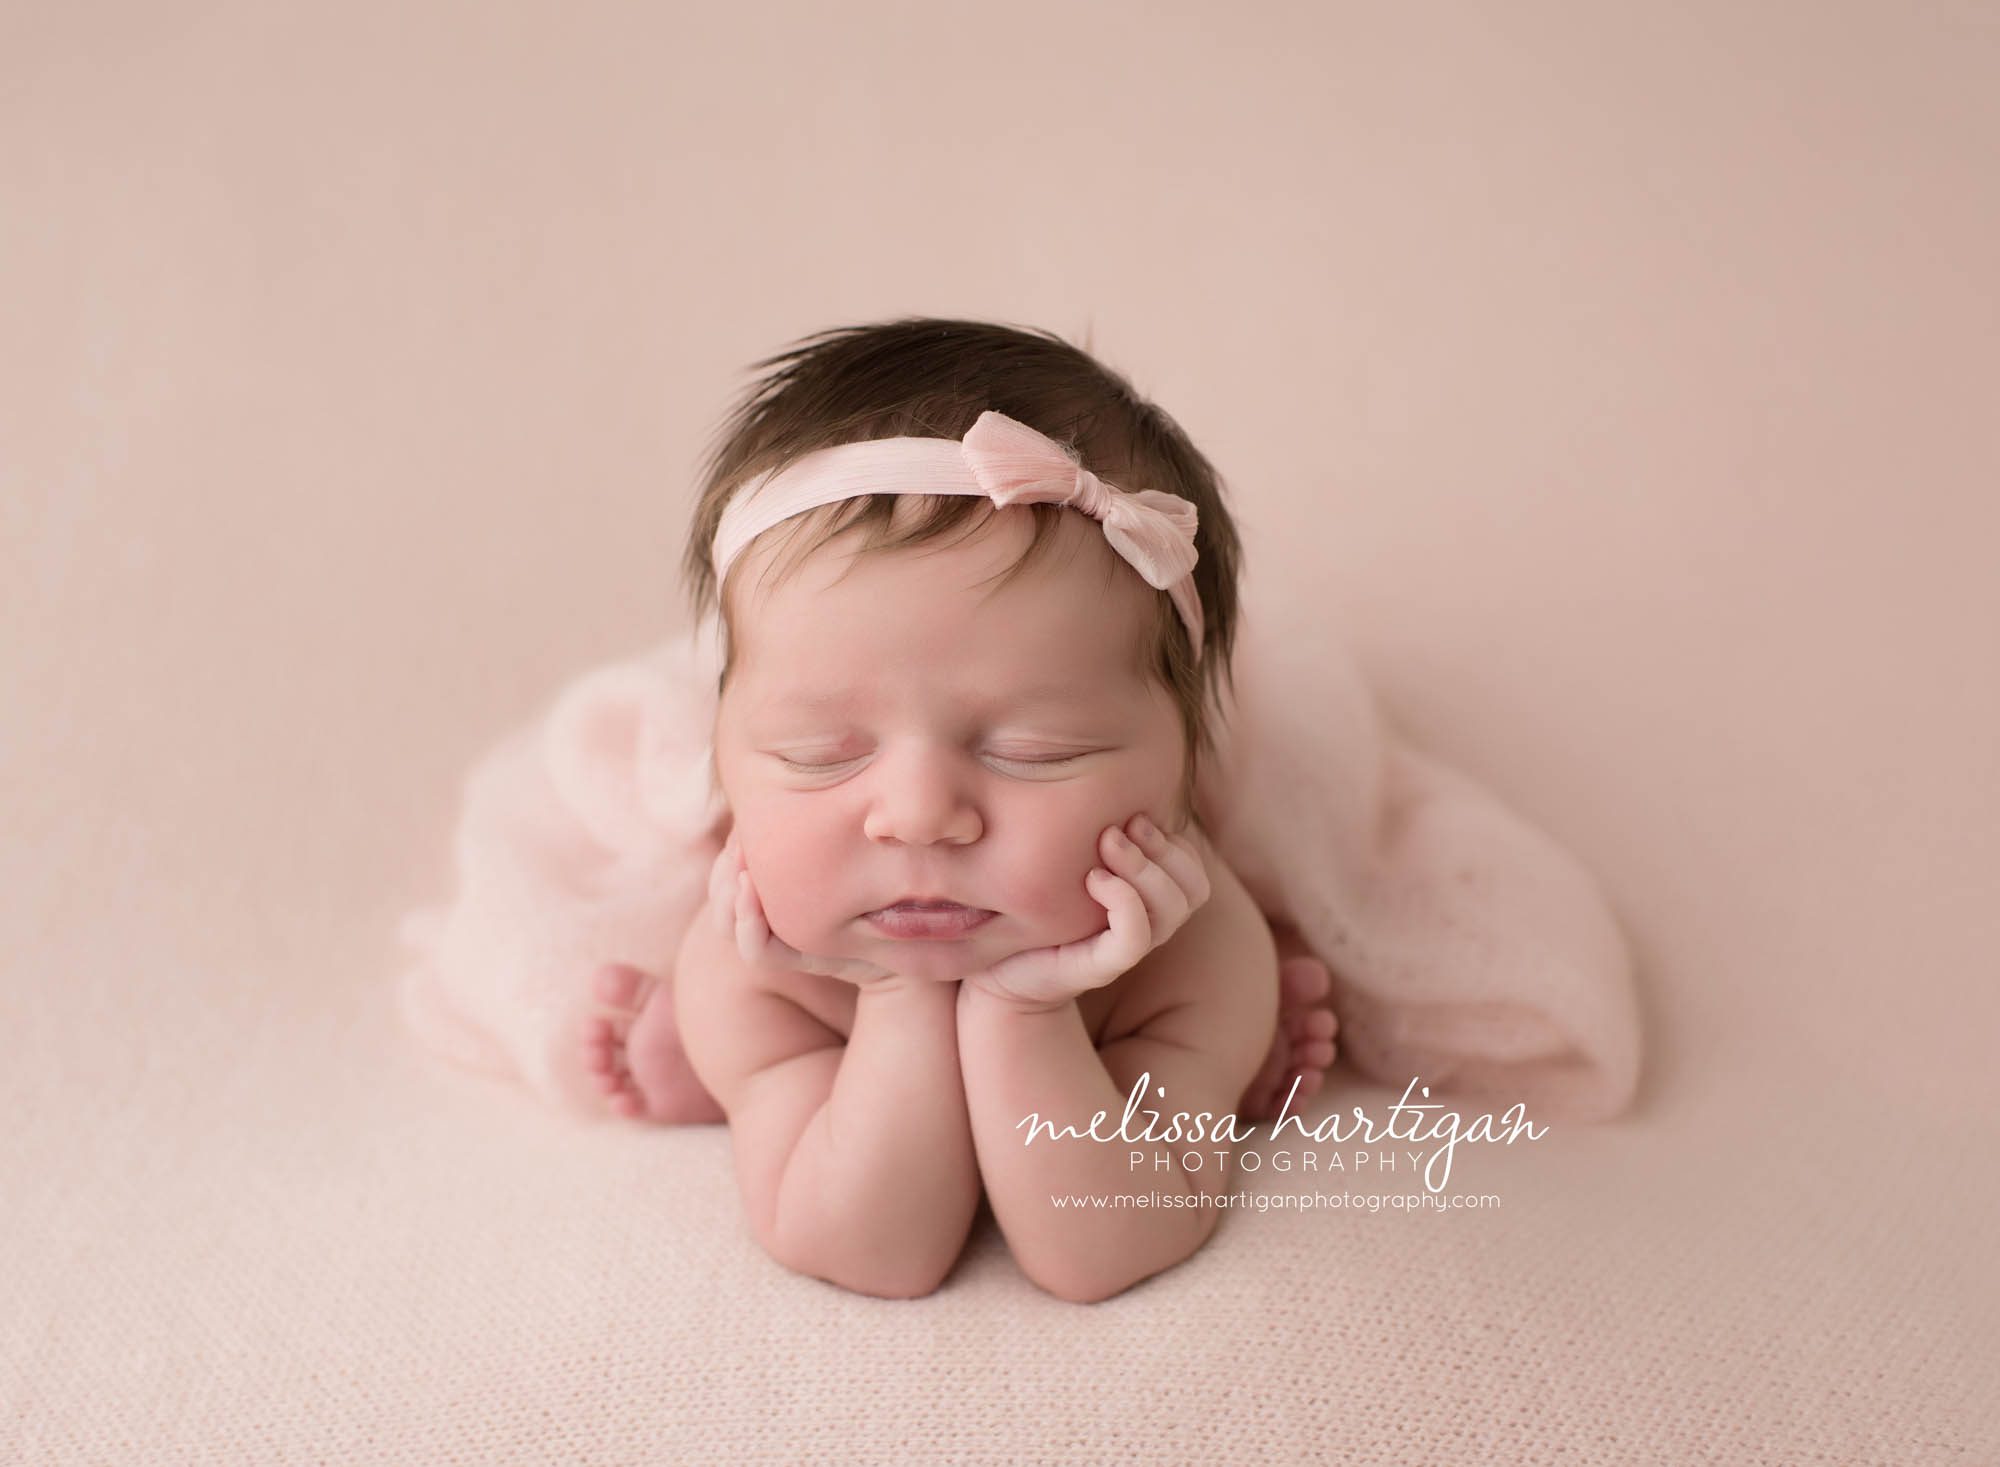 Melissa Hartigan Photography Connecticut Newborn Photographer Coventry Ct Middlefield CT baby Fairfield county Newborn and maternity CT photographer Baby girl pink headband in froggy pose on pink blanket